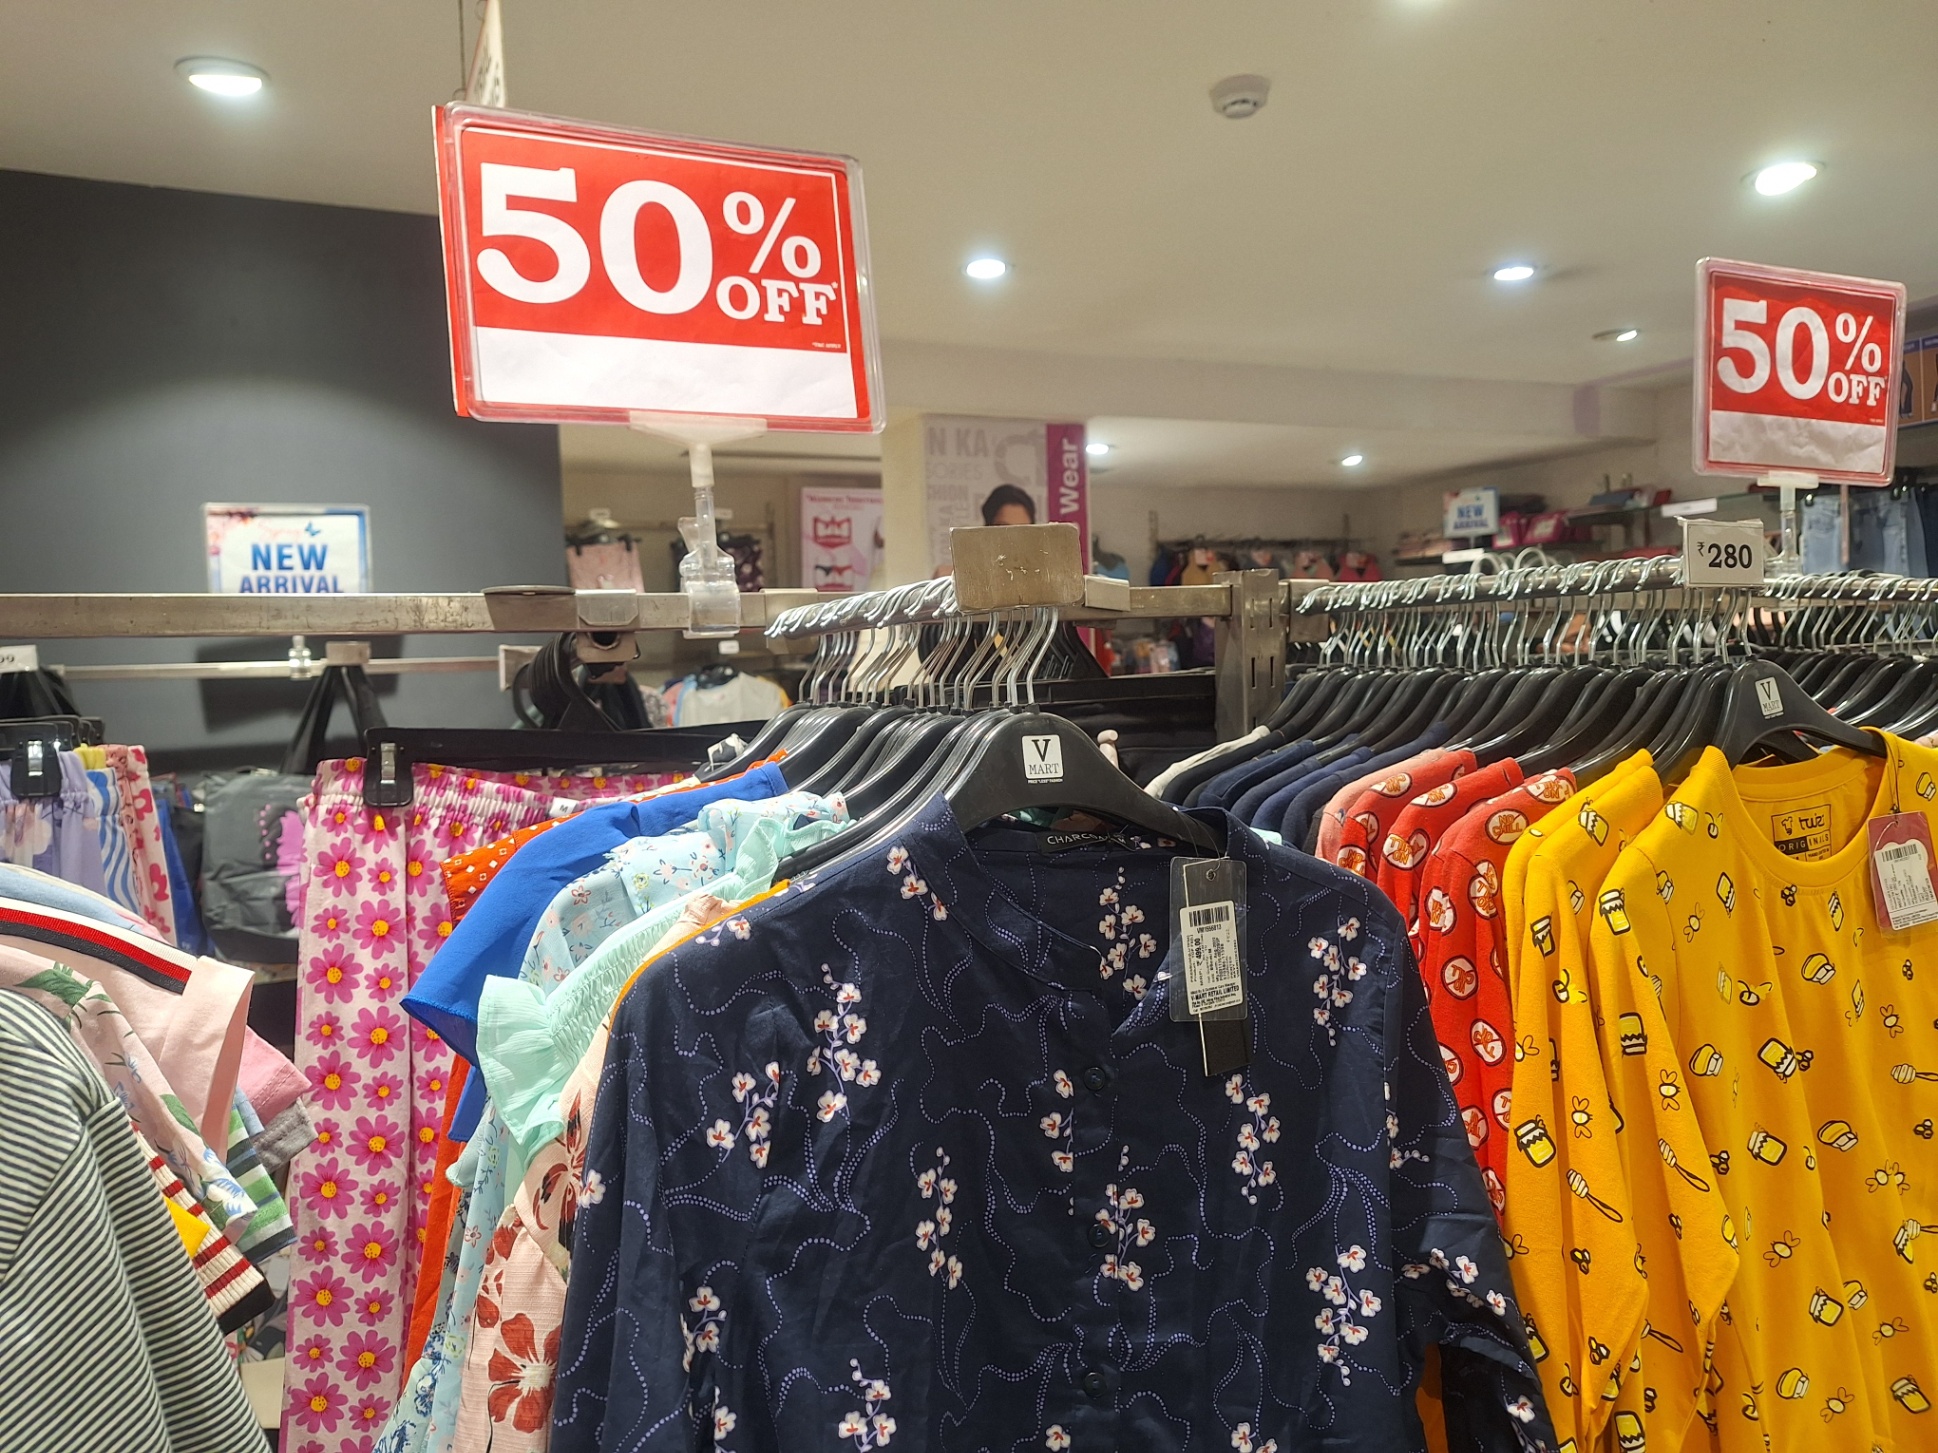 New Deal - Upto 50% Off @V MART PIPLANI, Bhopal